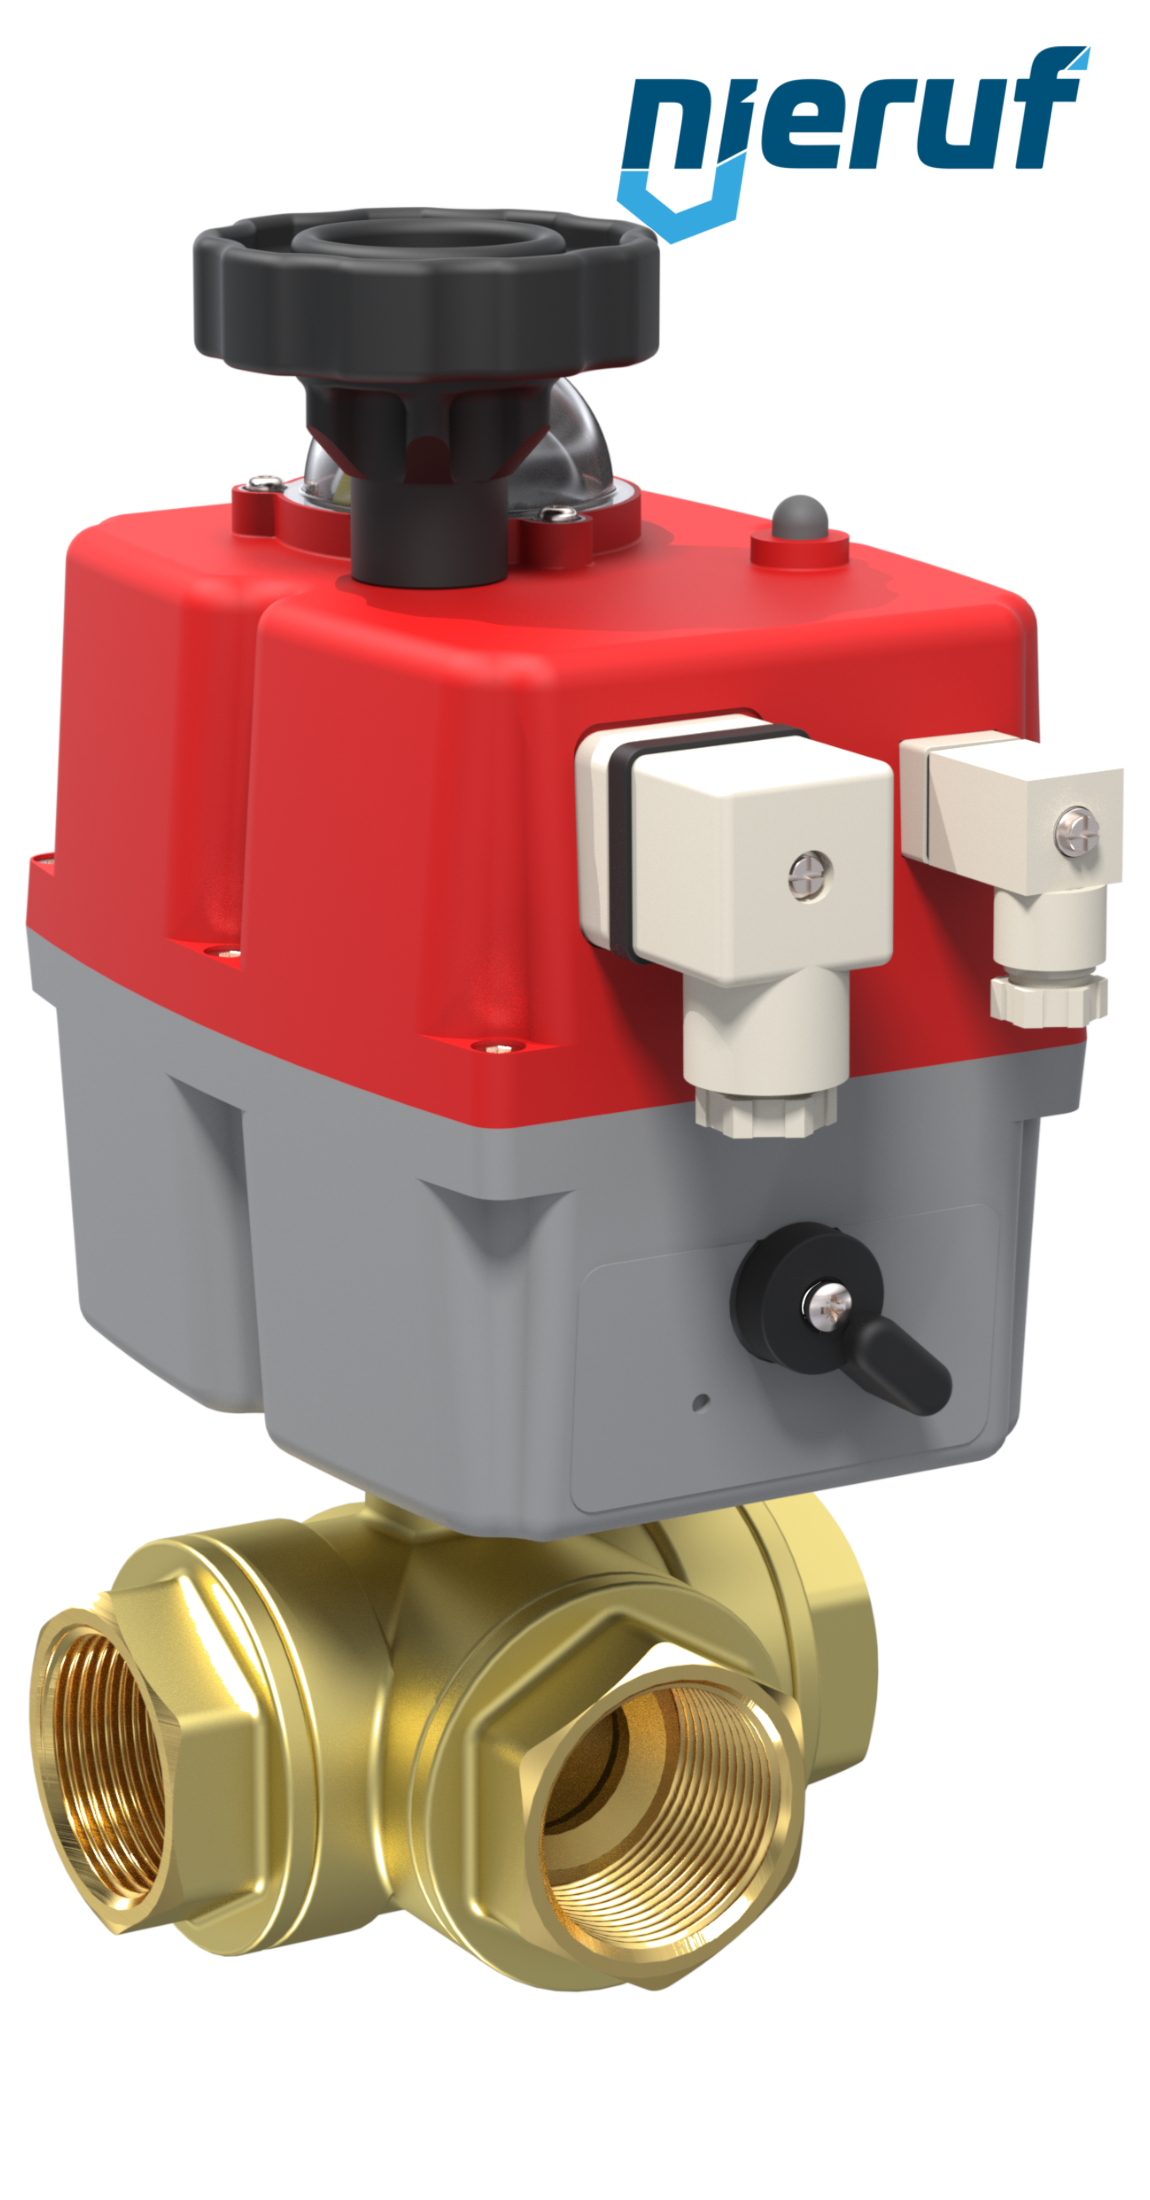 3 way automatic-ball valve 24-240V DN32 - 1 1/4" inch brass full port design with T drilling